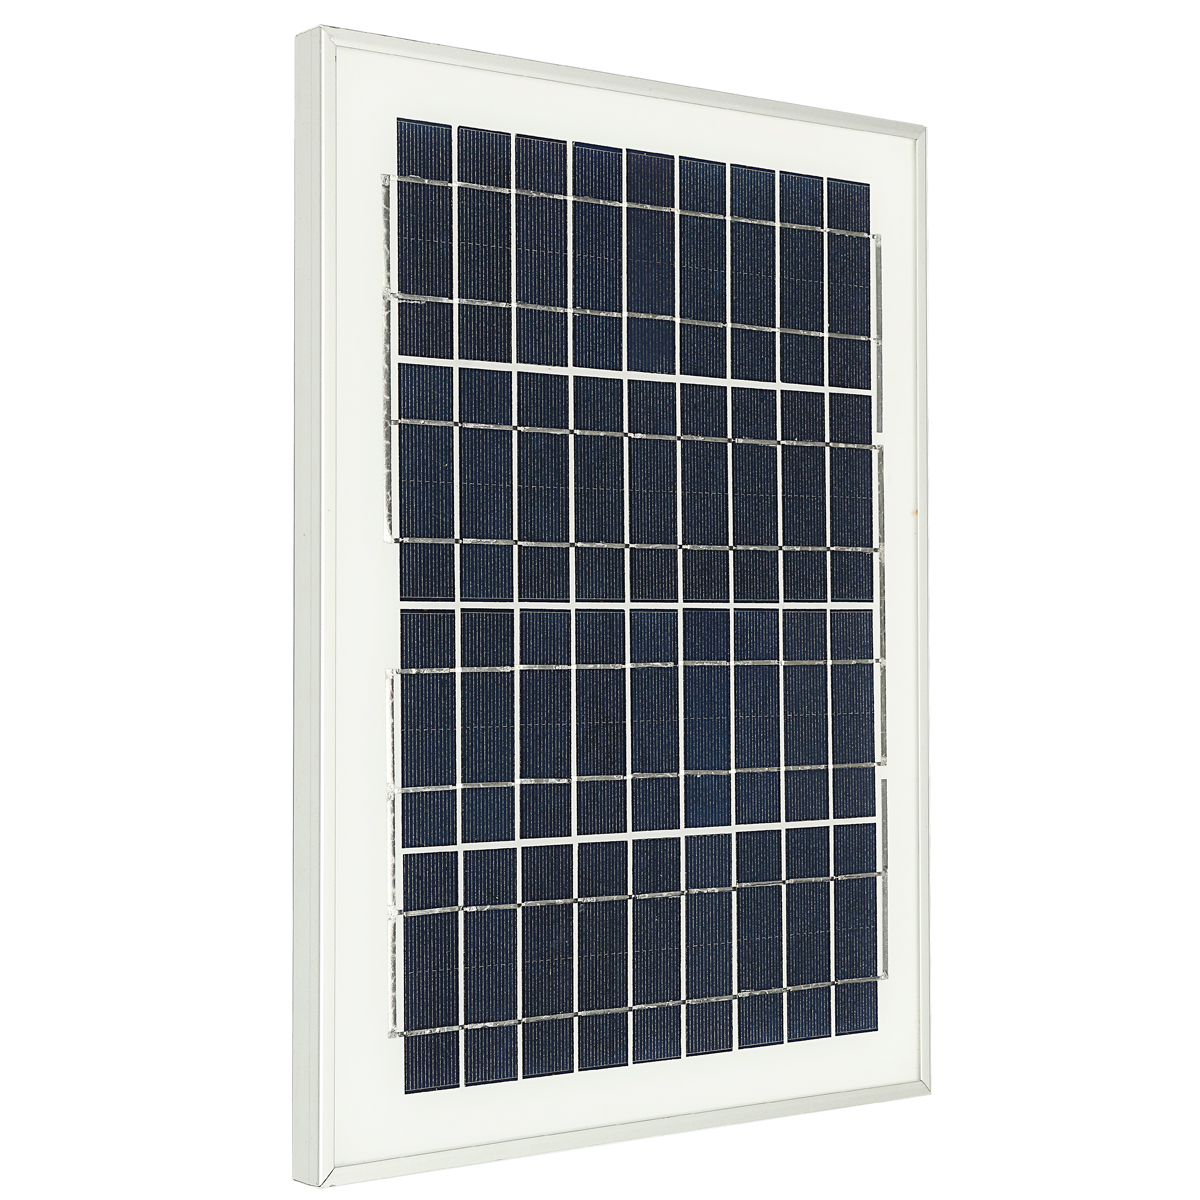 18V 10W Solar Panel For Outdoor Fountain Pond Pool Garden Submersible Water Pump With Crocodile Thre 64